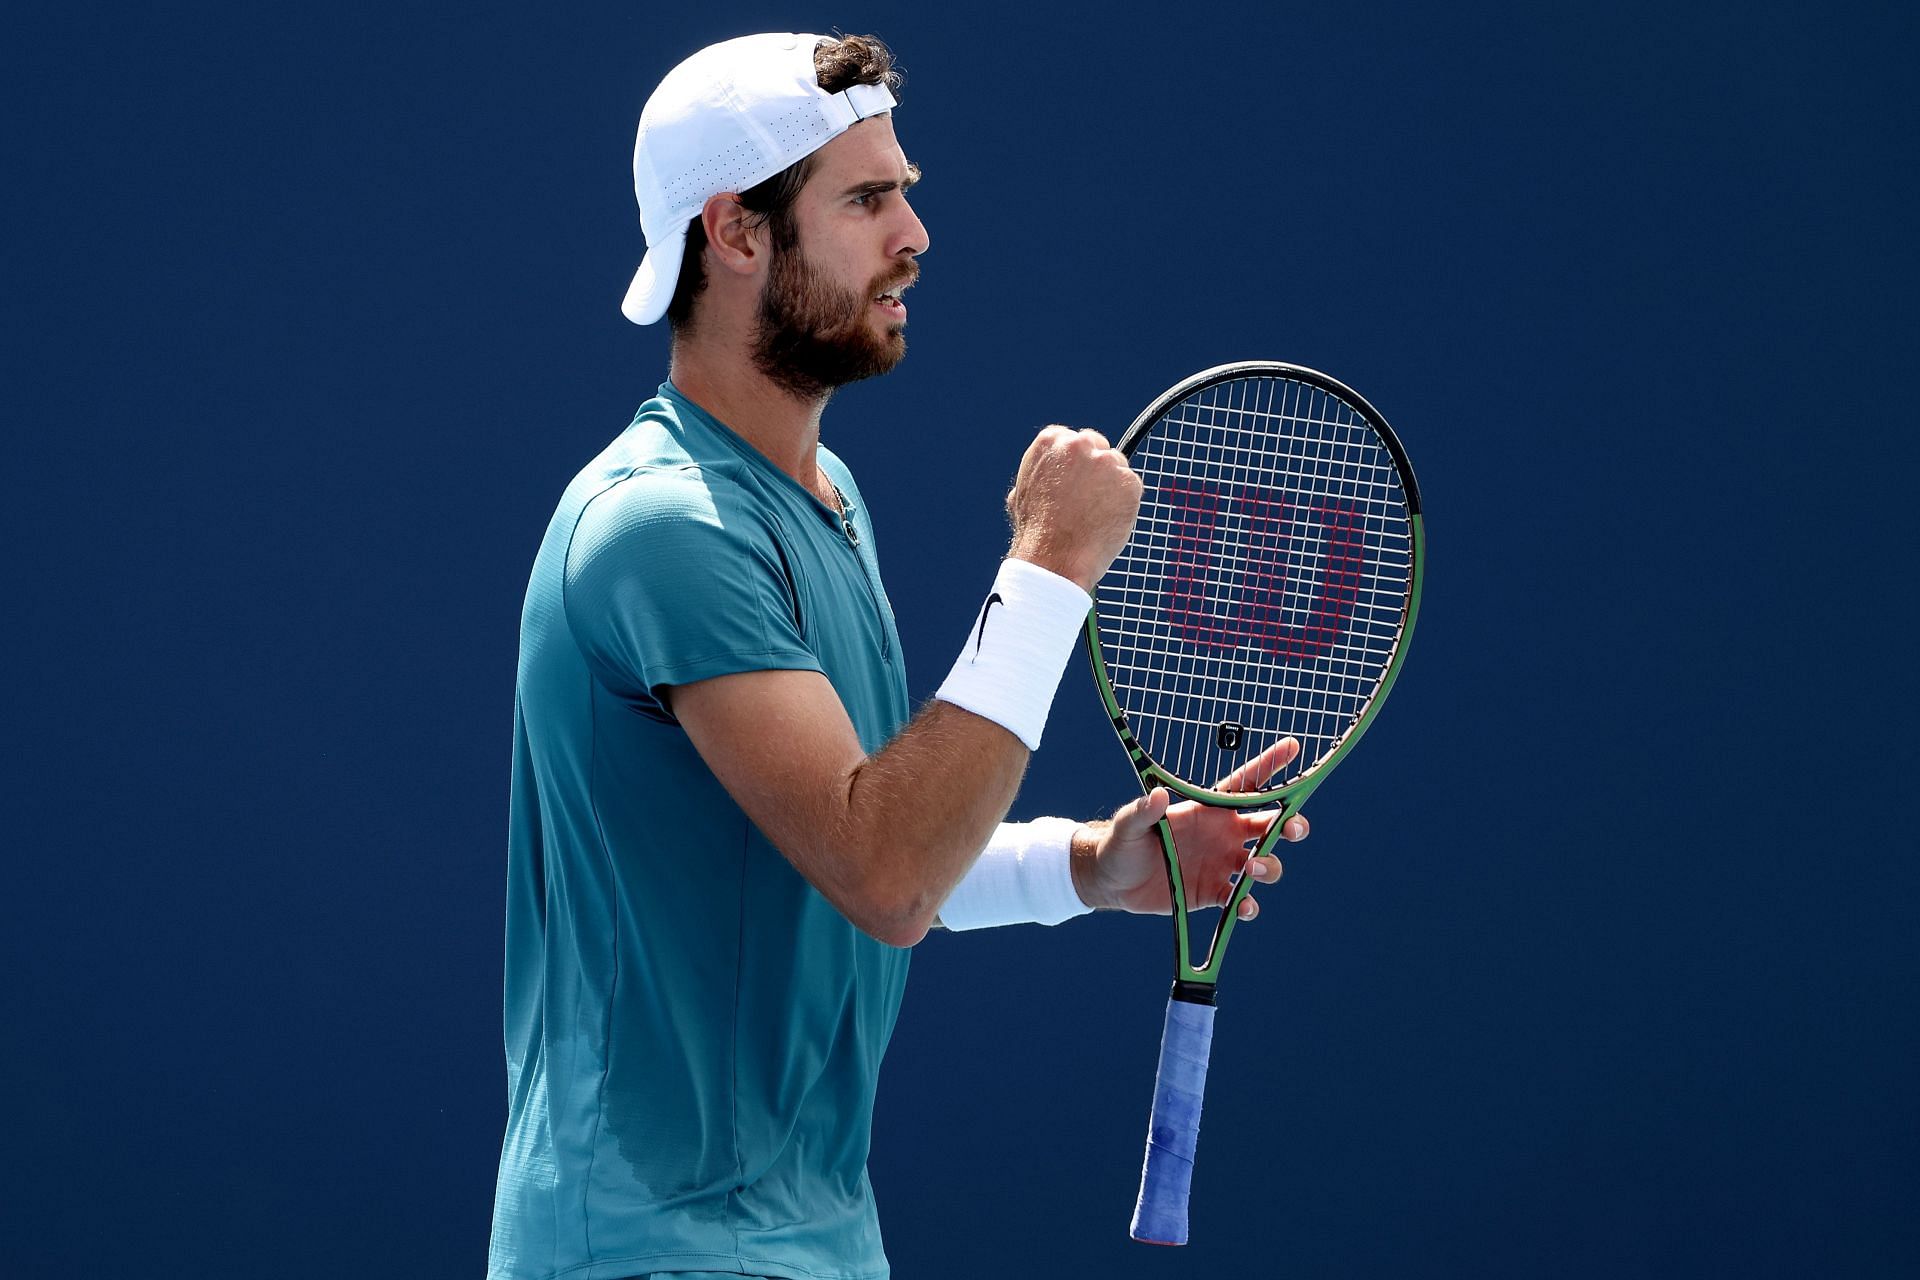 Khachanov is into the last four in Miami.